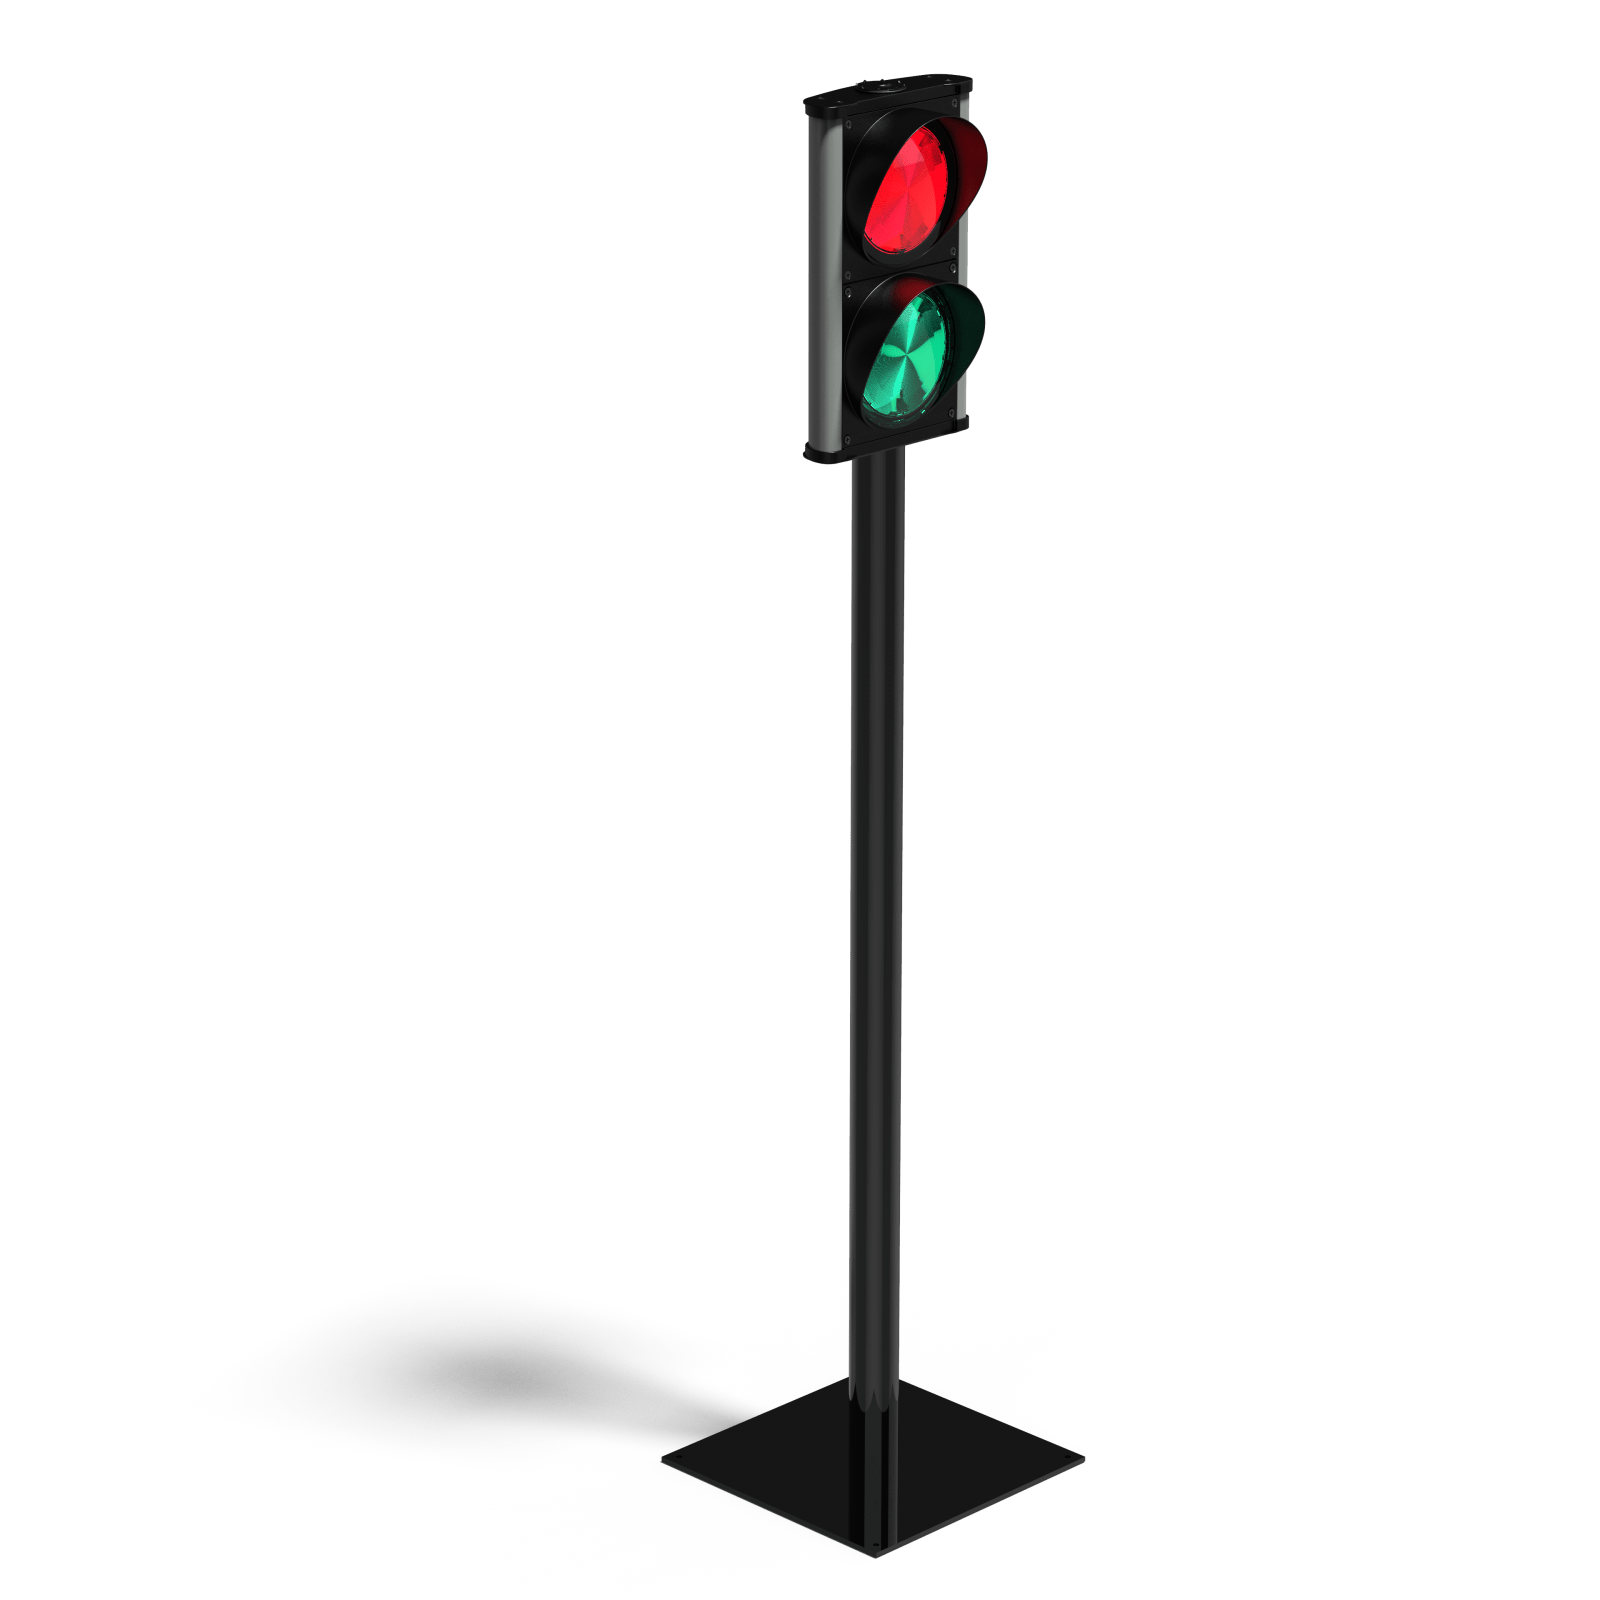 New queue traffic light for covid pandemic rules